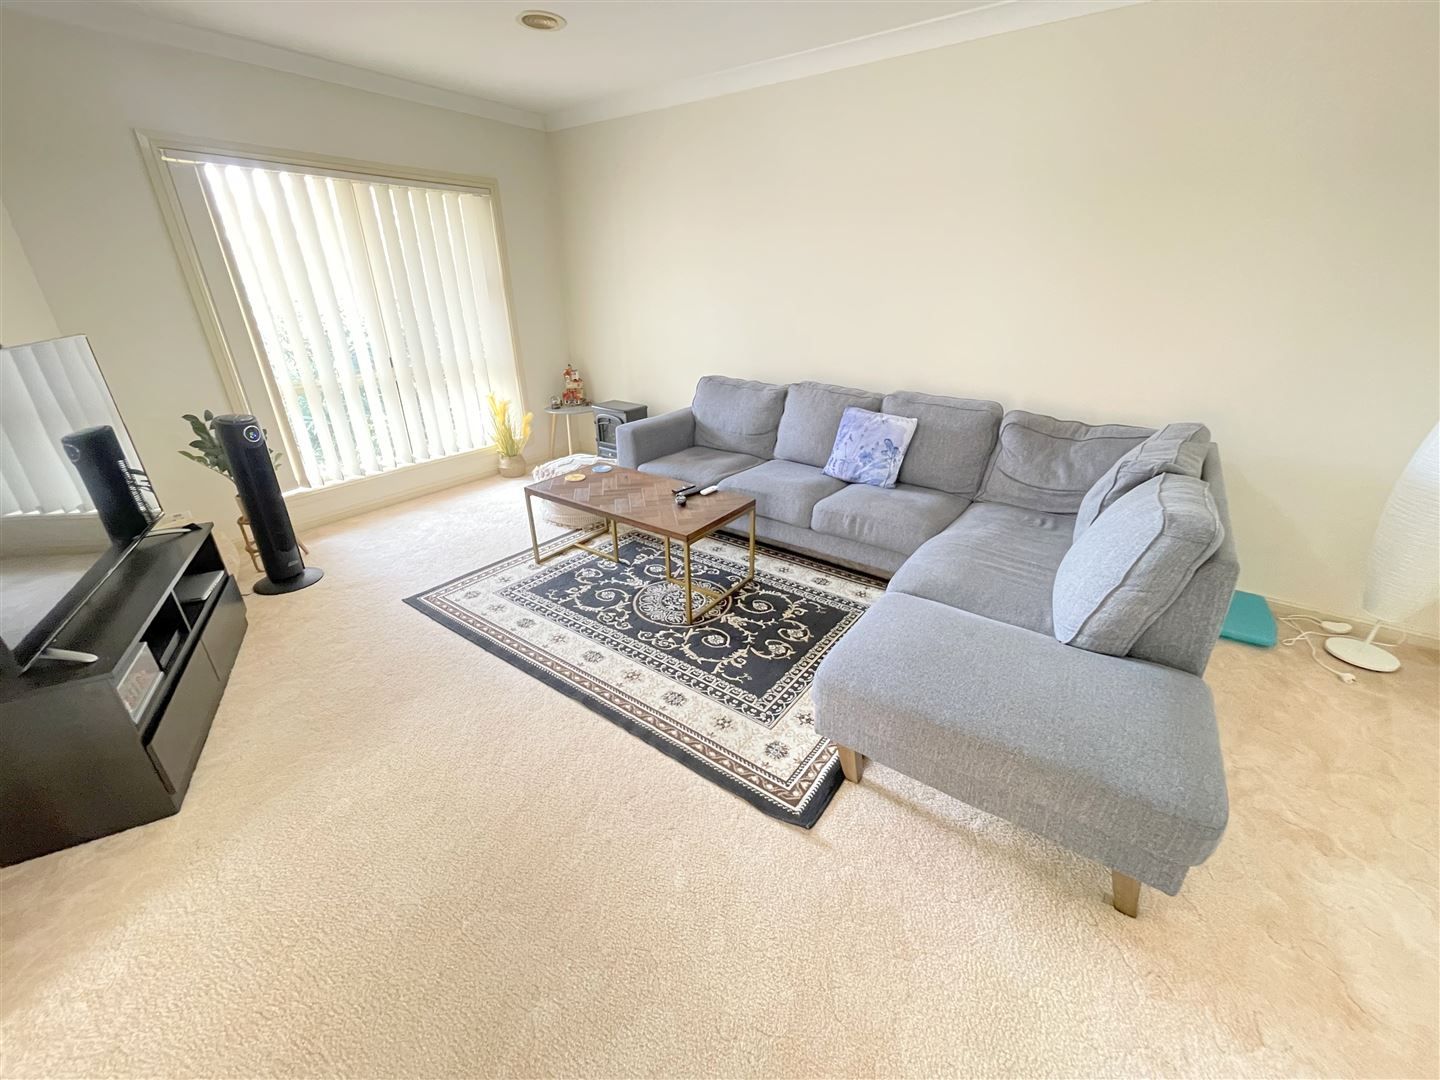 3 bedrooms Apartment / Unit / Flat in 16A Robrick Close GRIFFITH NSW, 2680